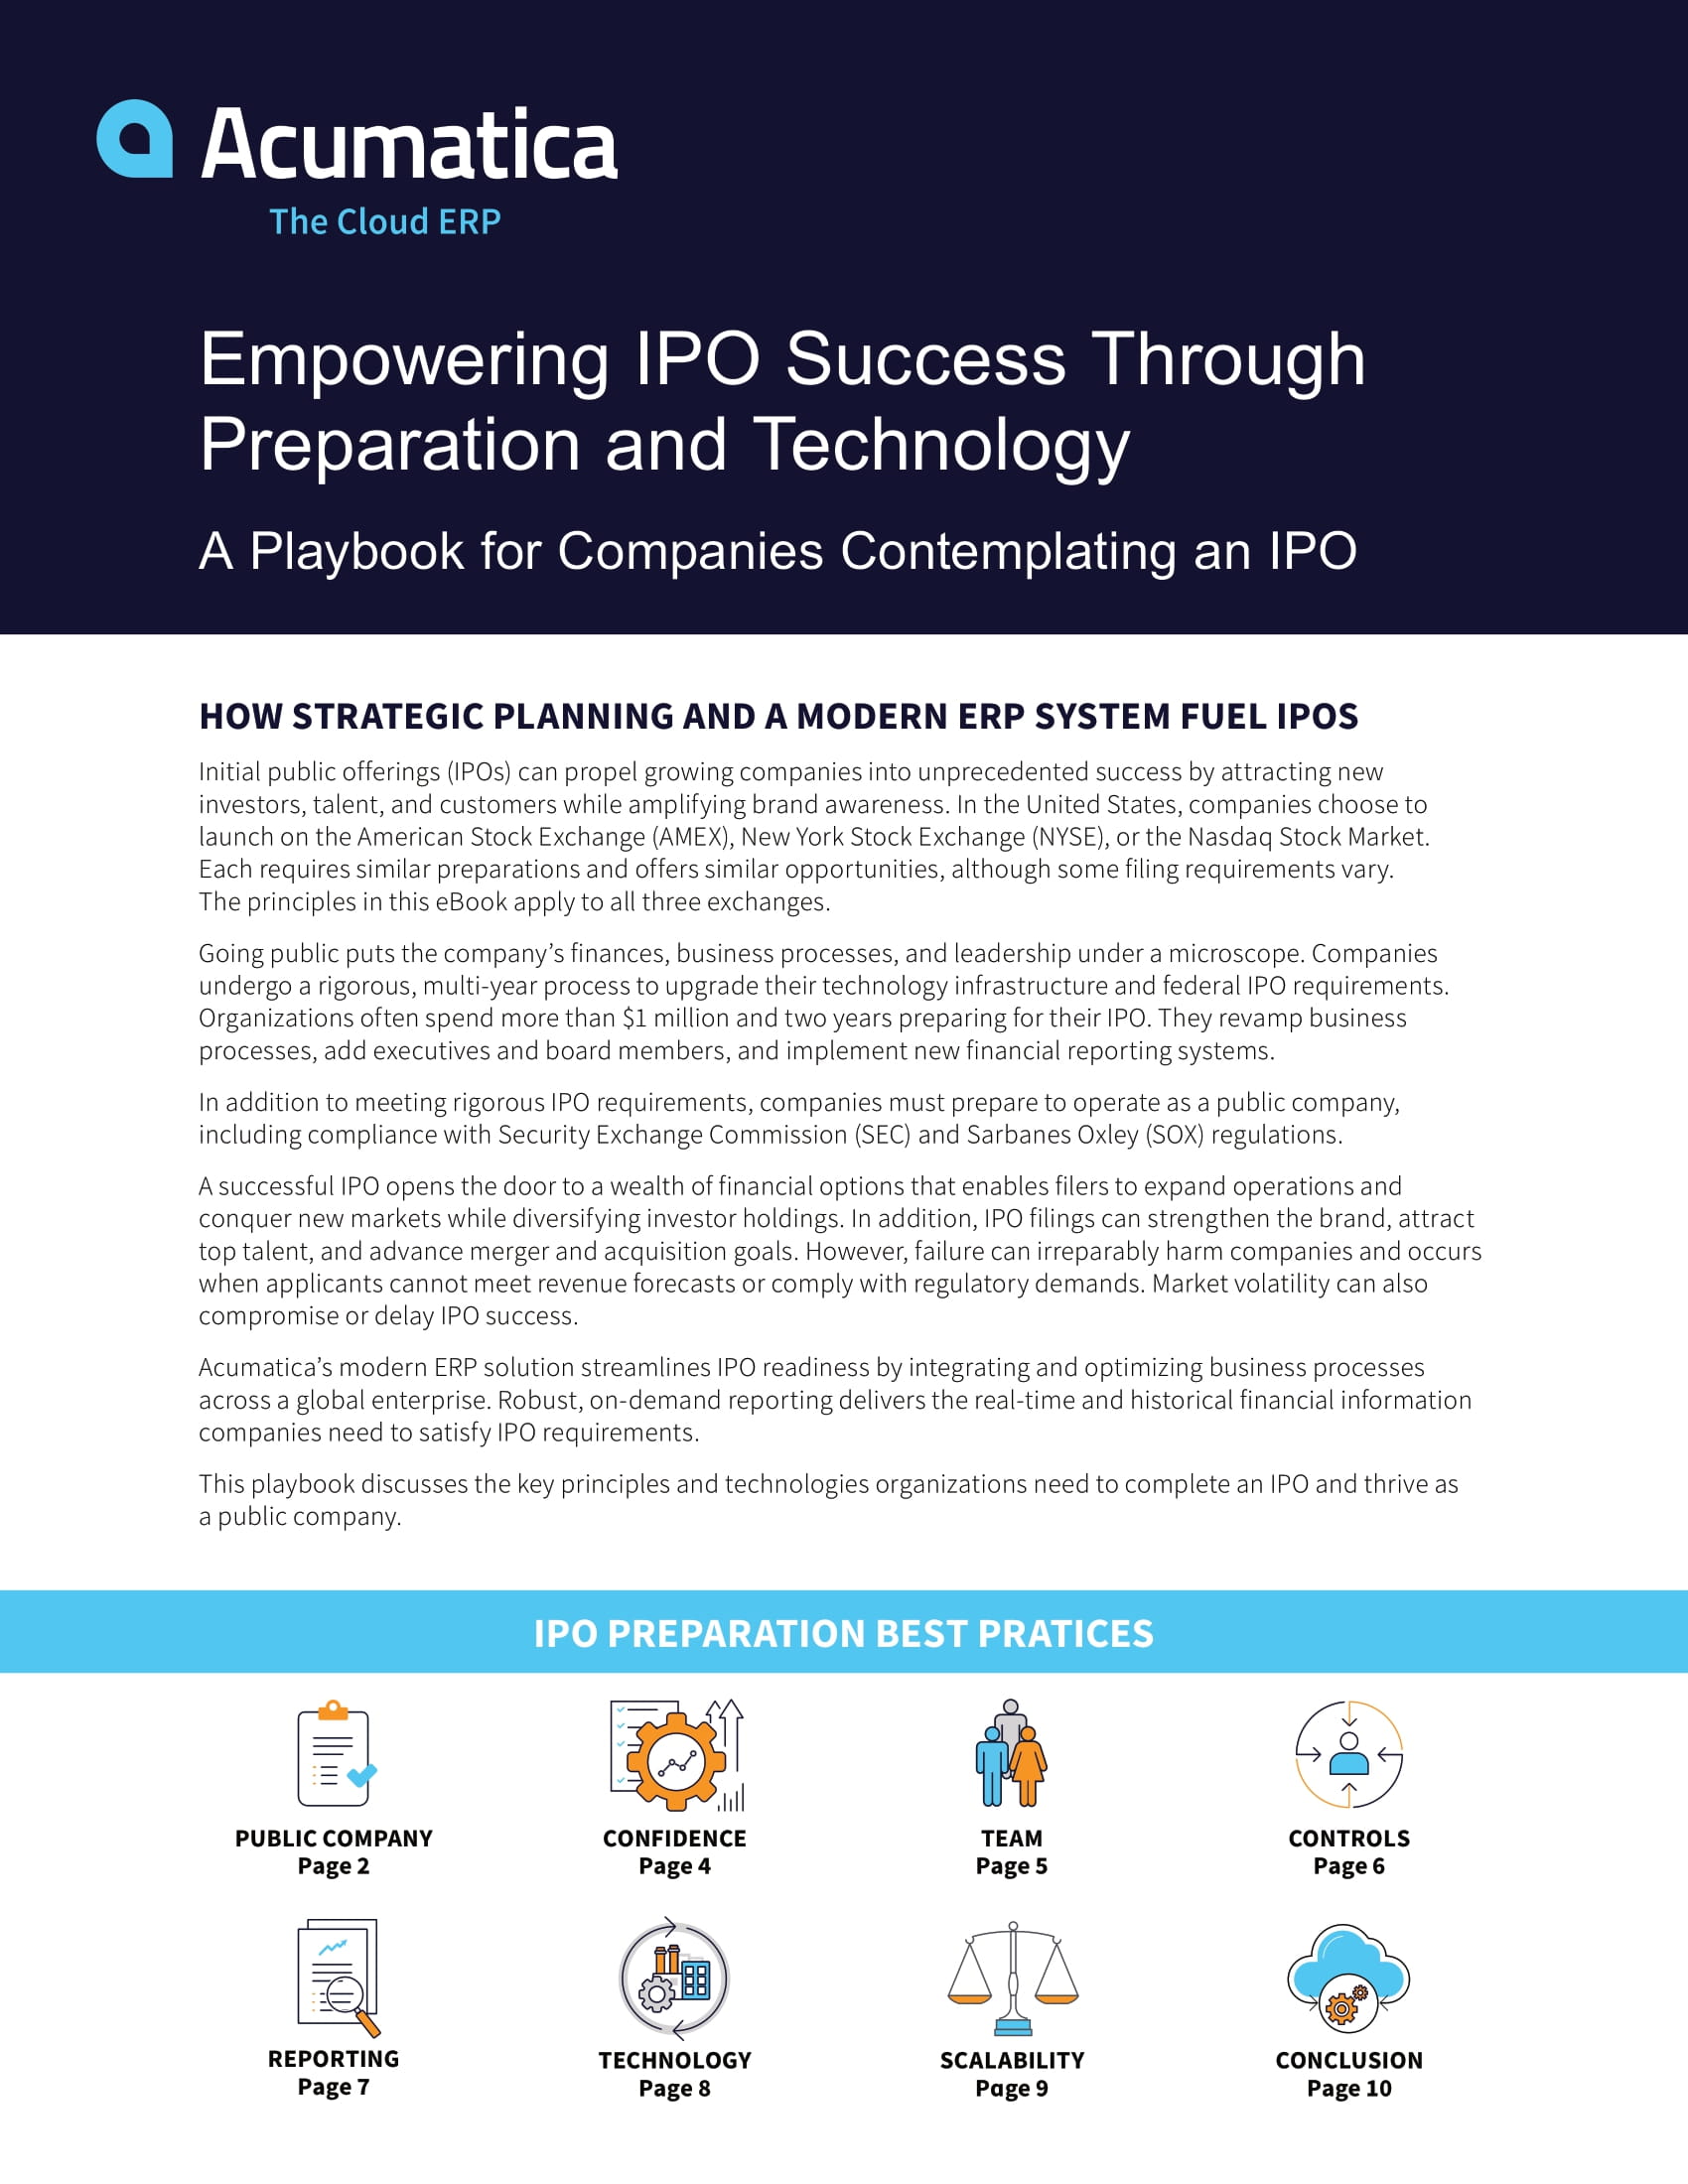 The IPO Success Playbook